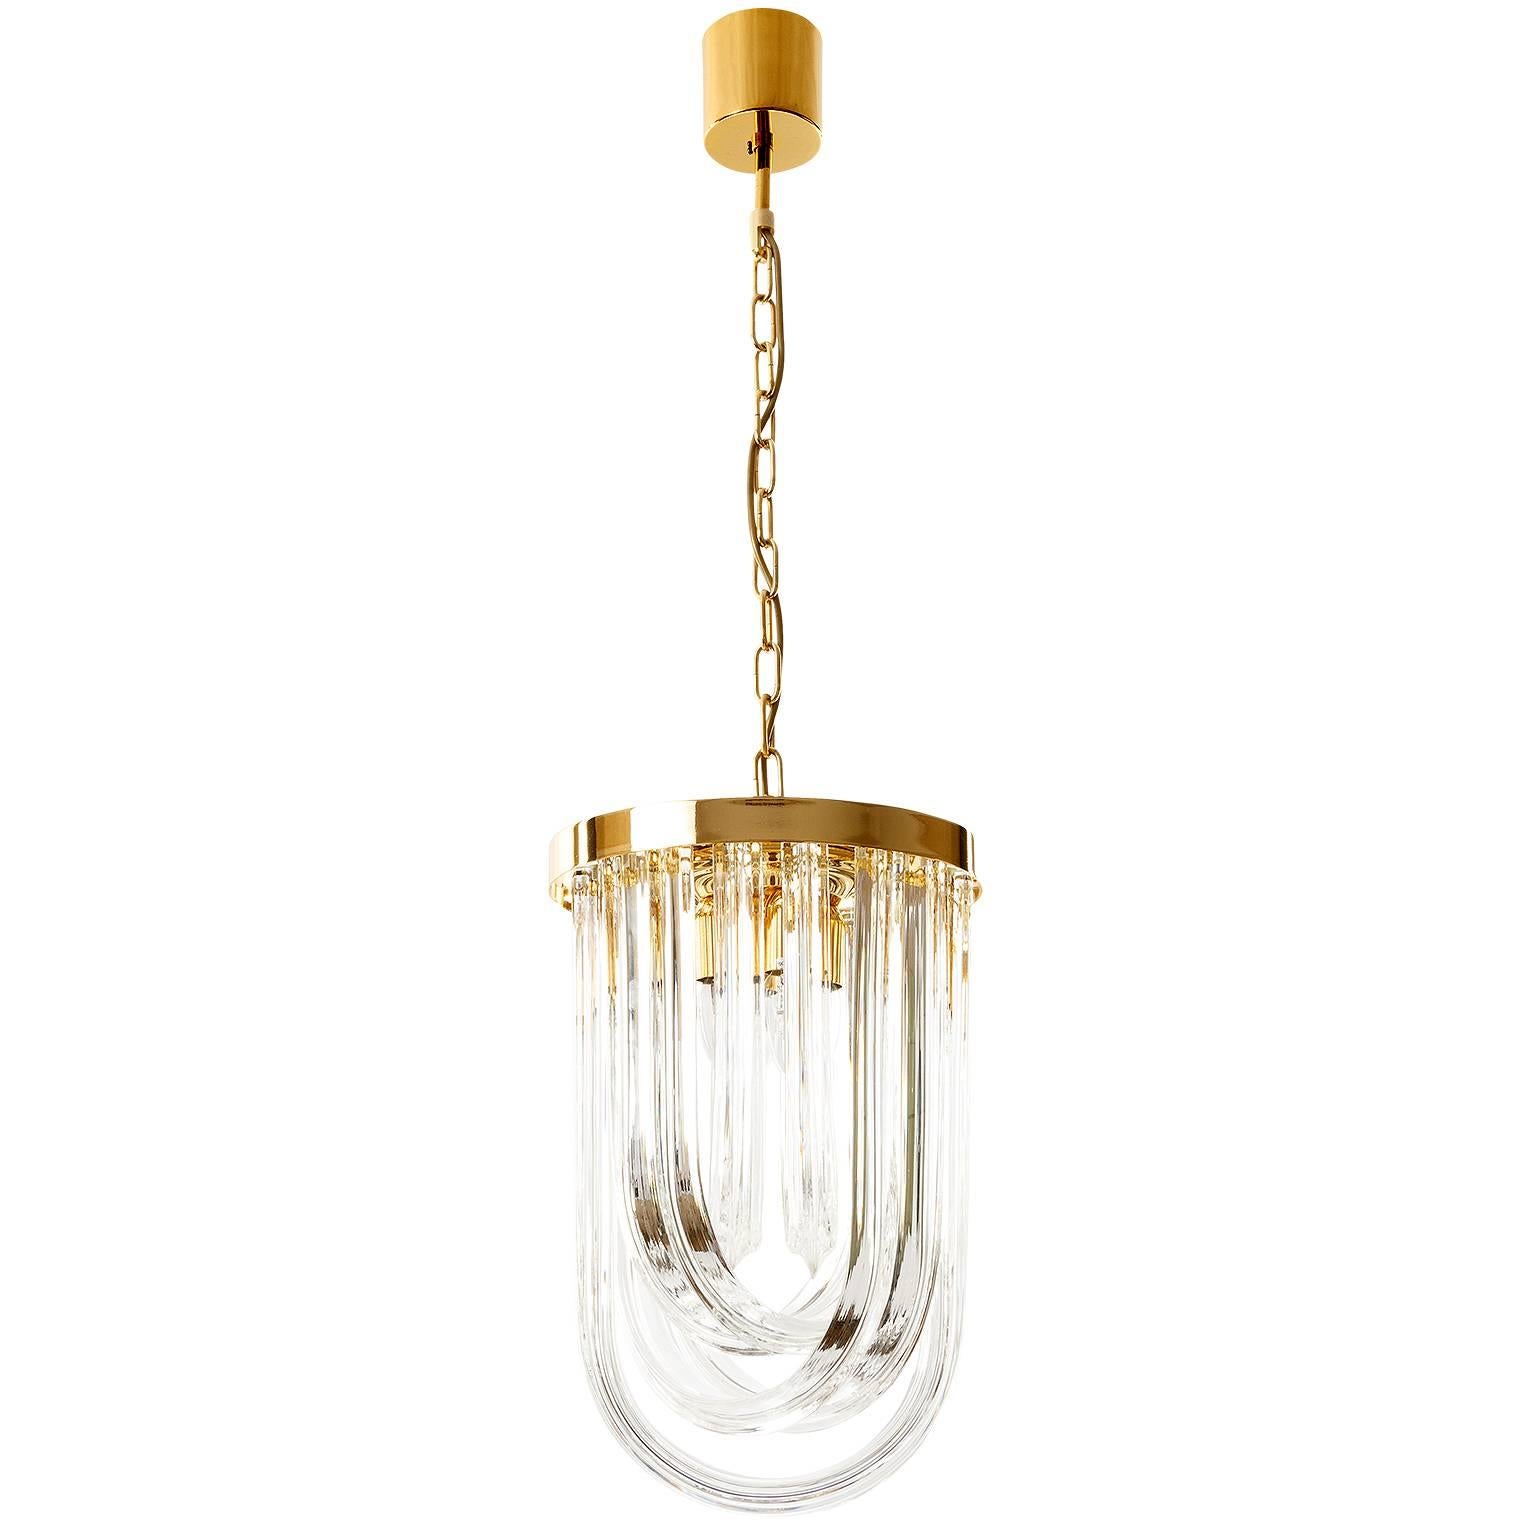 Venini Pendant Light Chandelier, Curved Crystal Glass and Gilt Brass, Italy